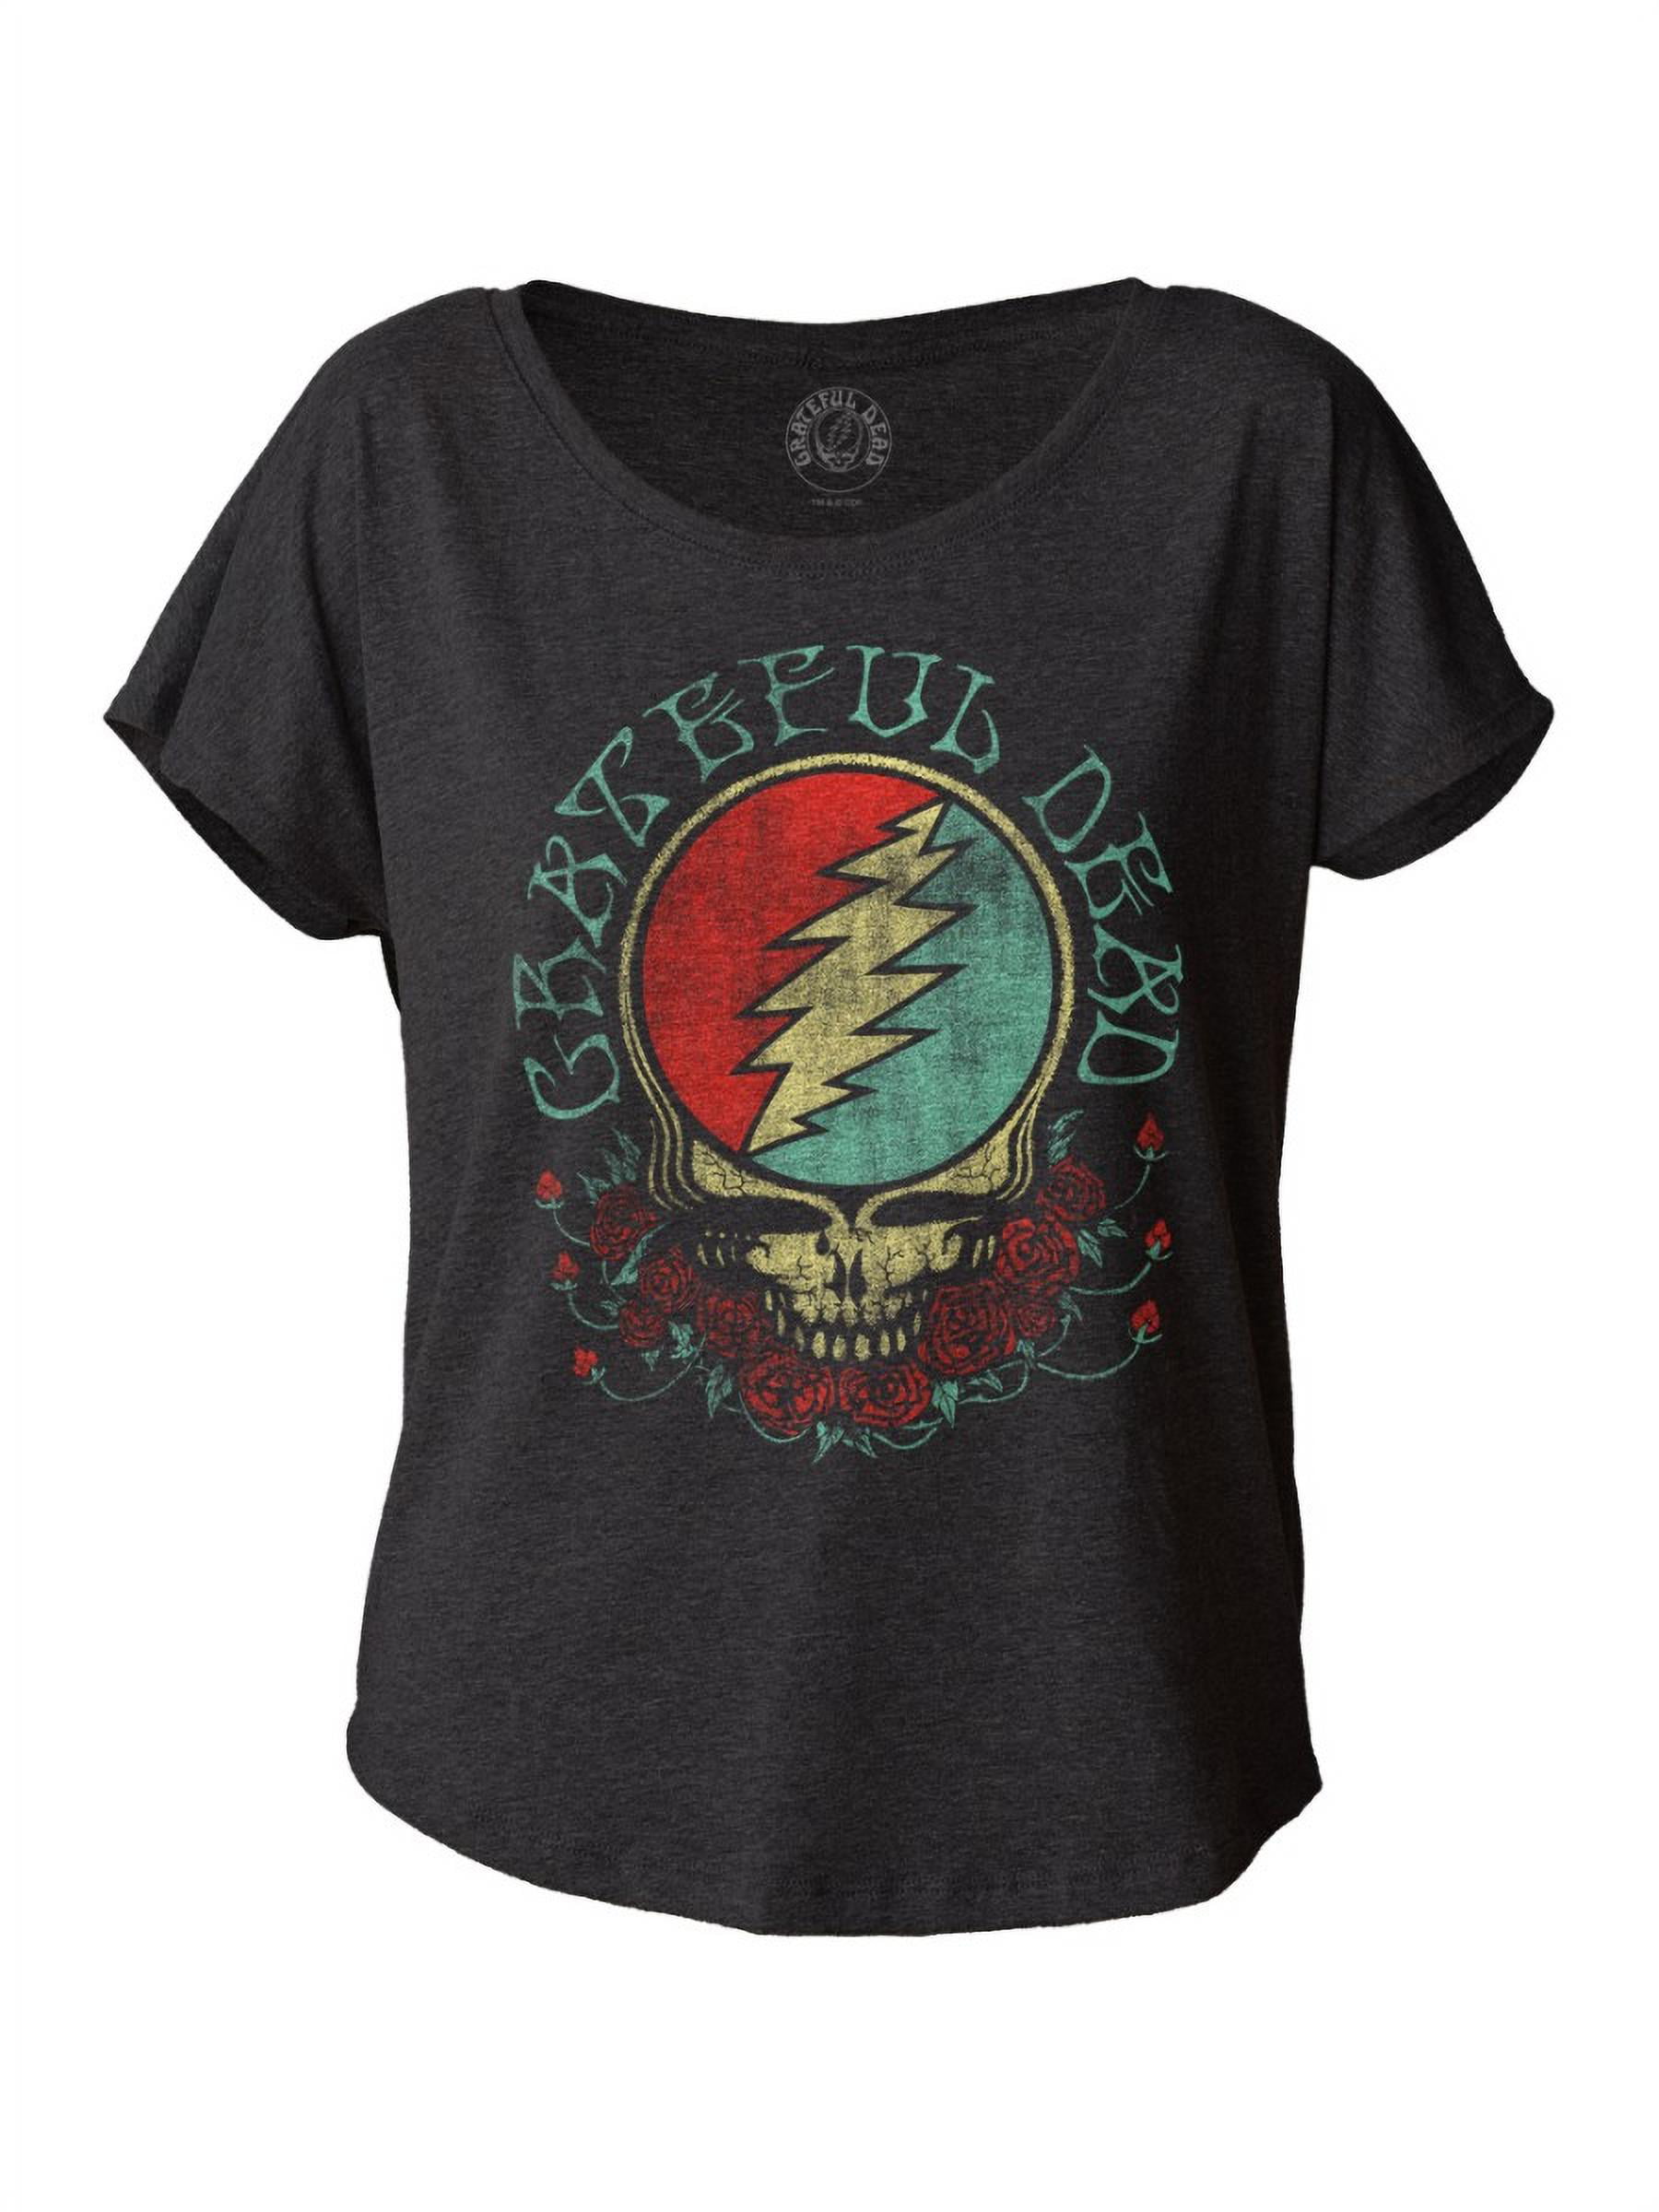 Grateful Dead T-shirt Steal Your Roses